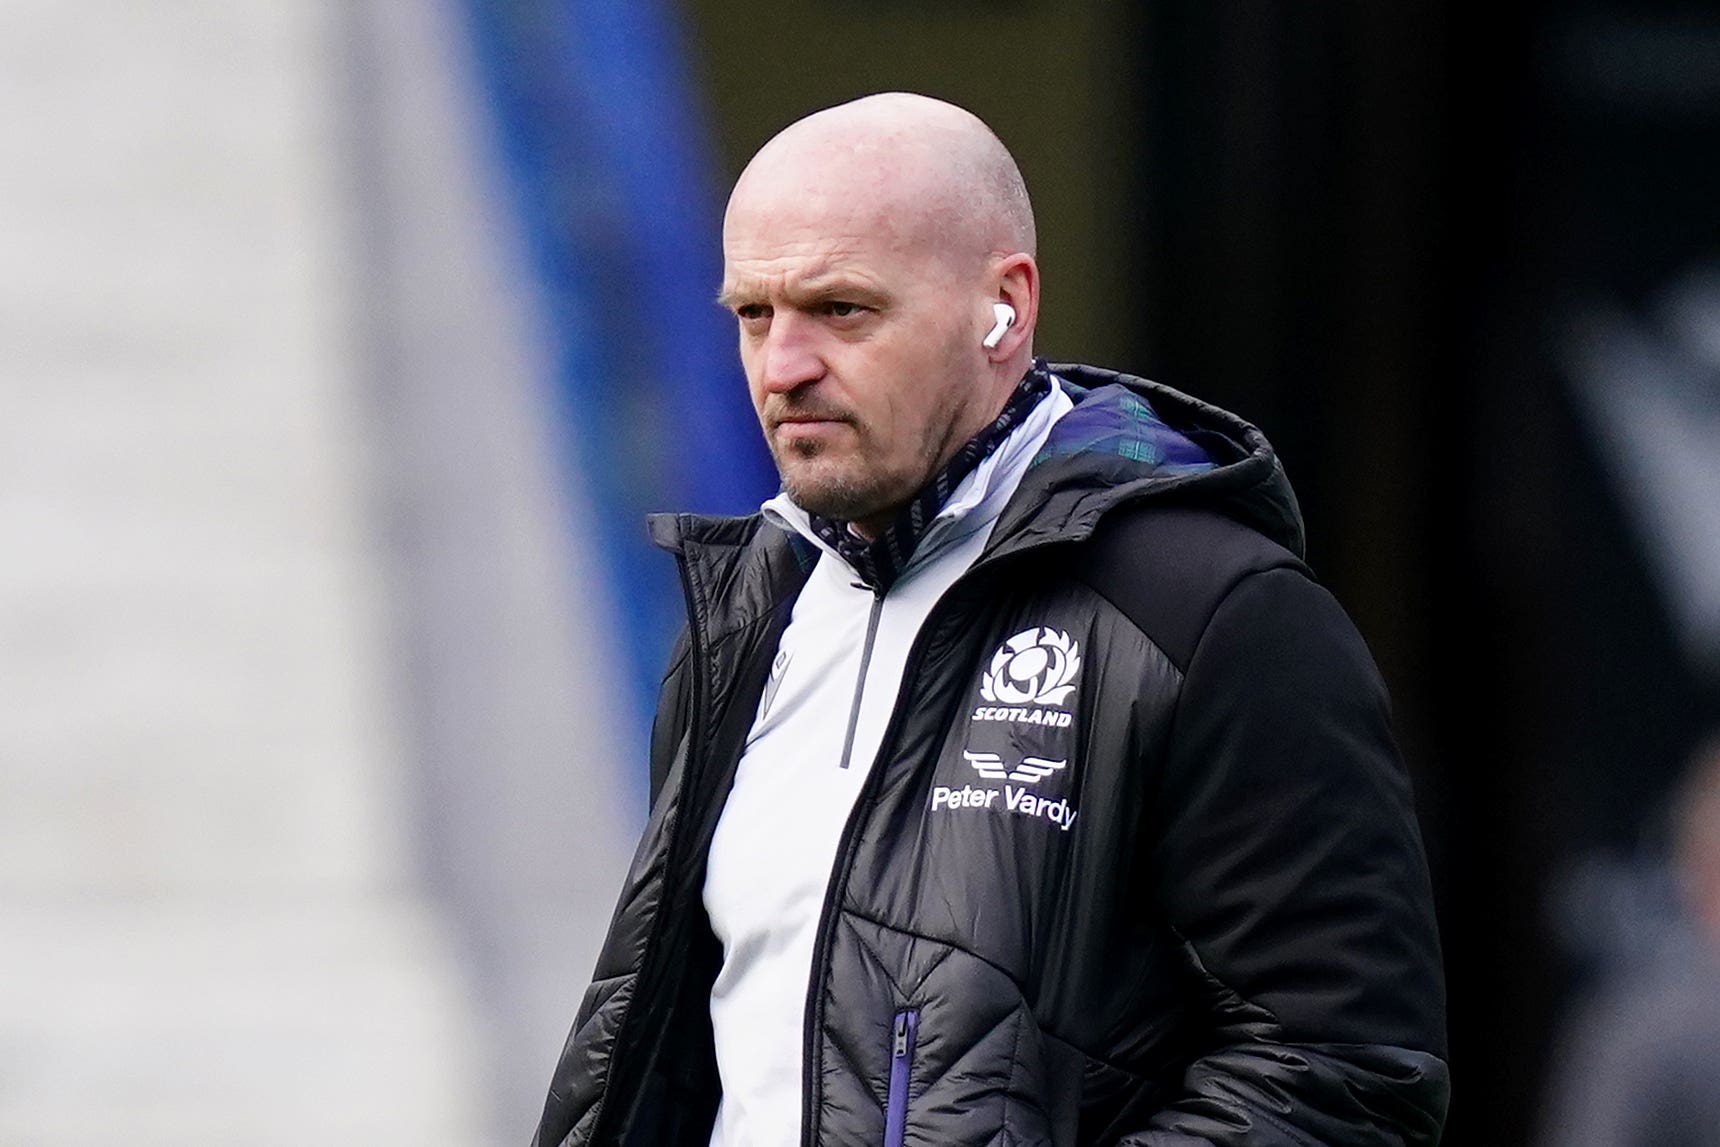 Gregor Townsend may reflect on a missed opportunity for Scotland